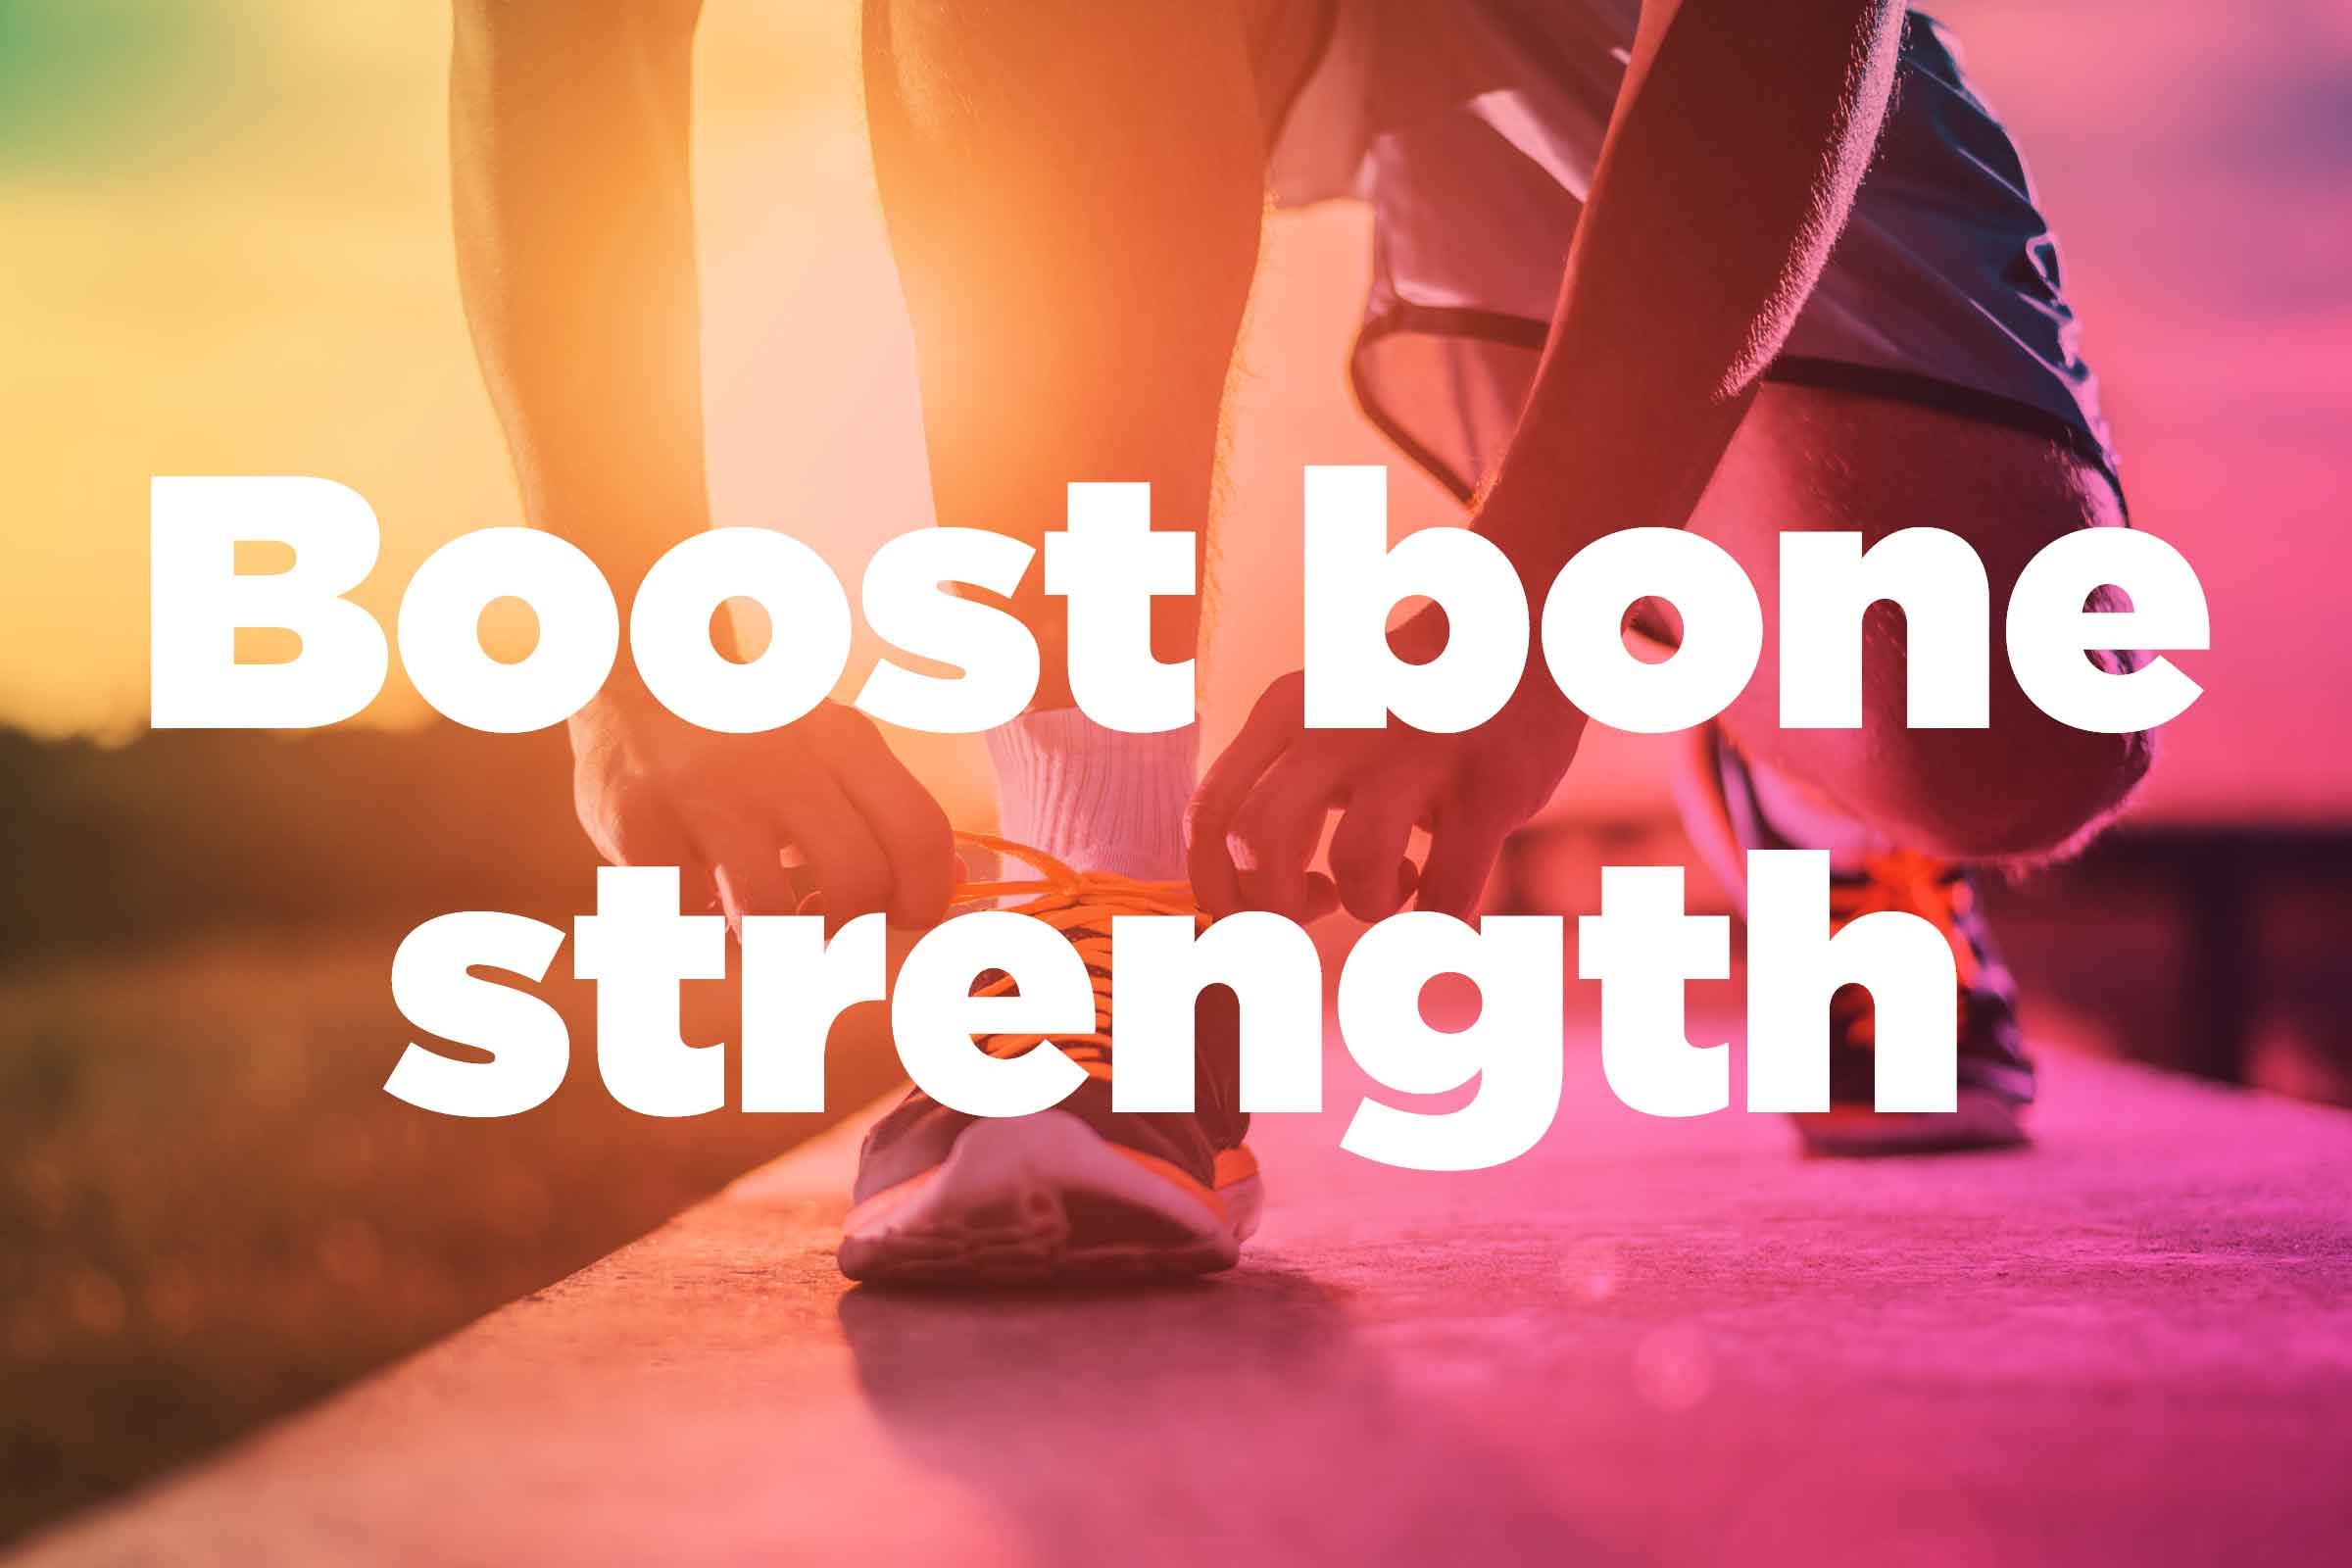 Text on background image of runner: "Boost bone strength."